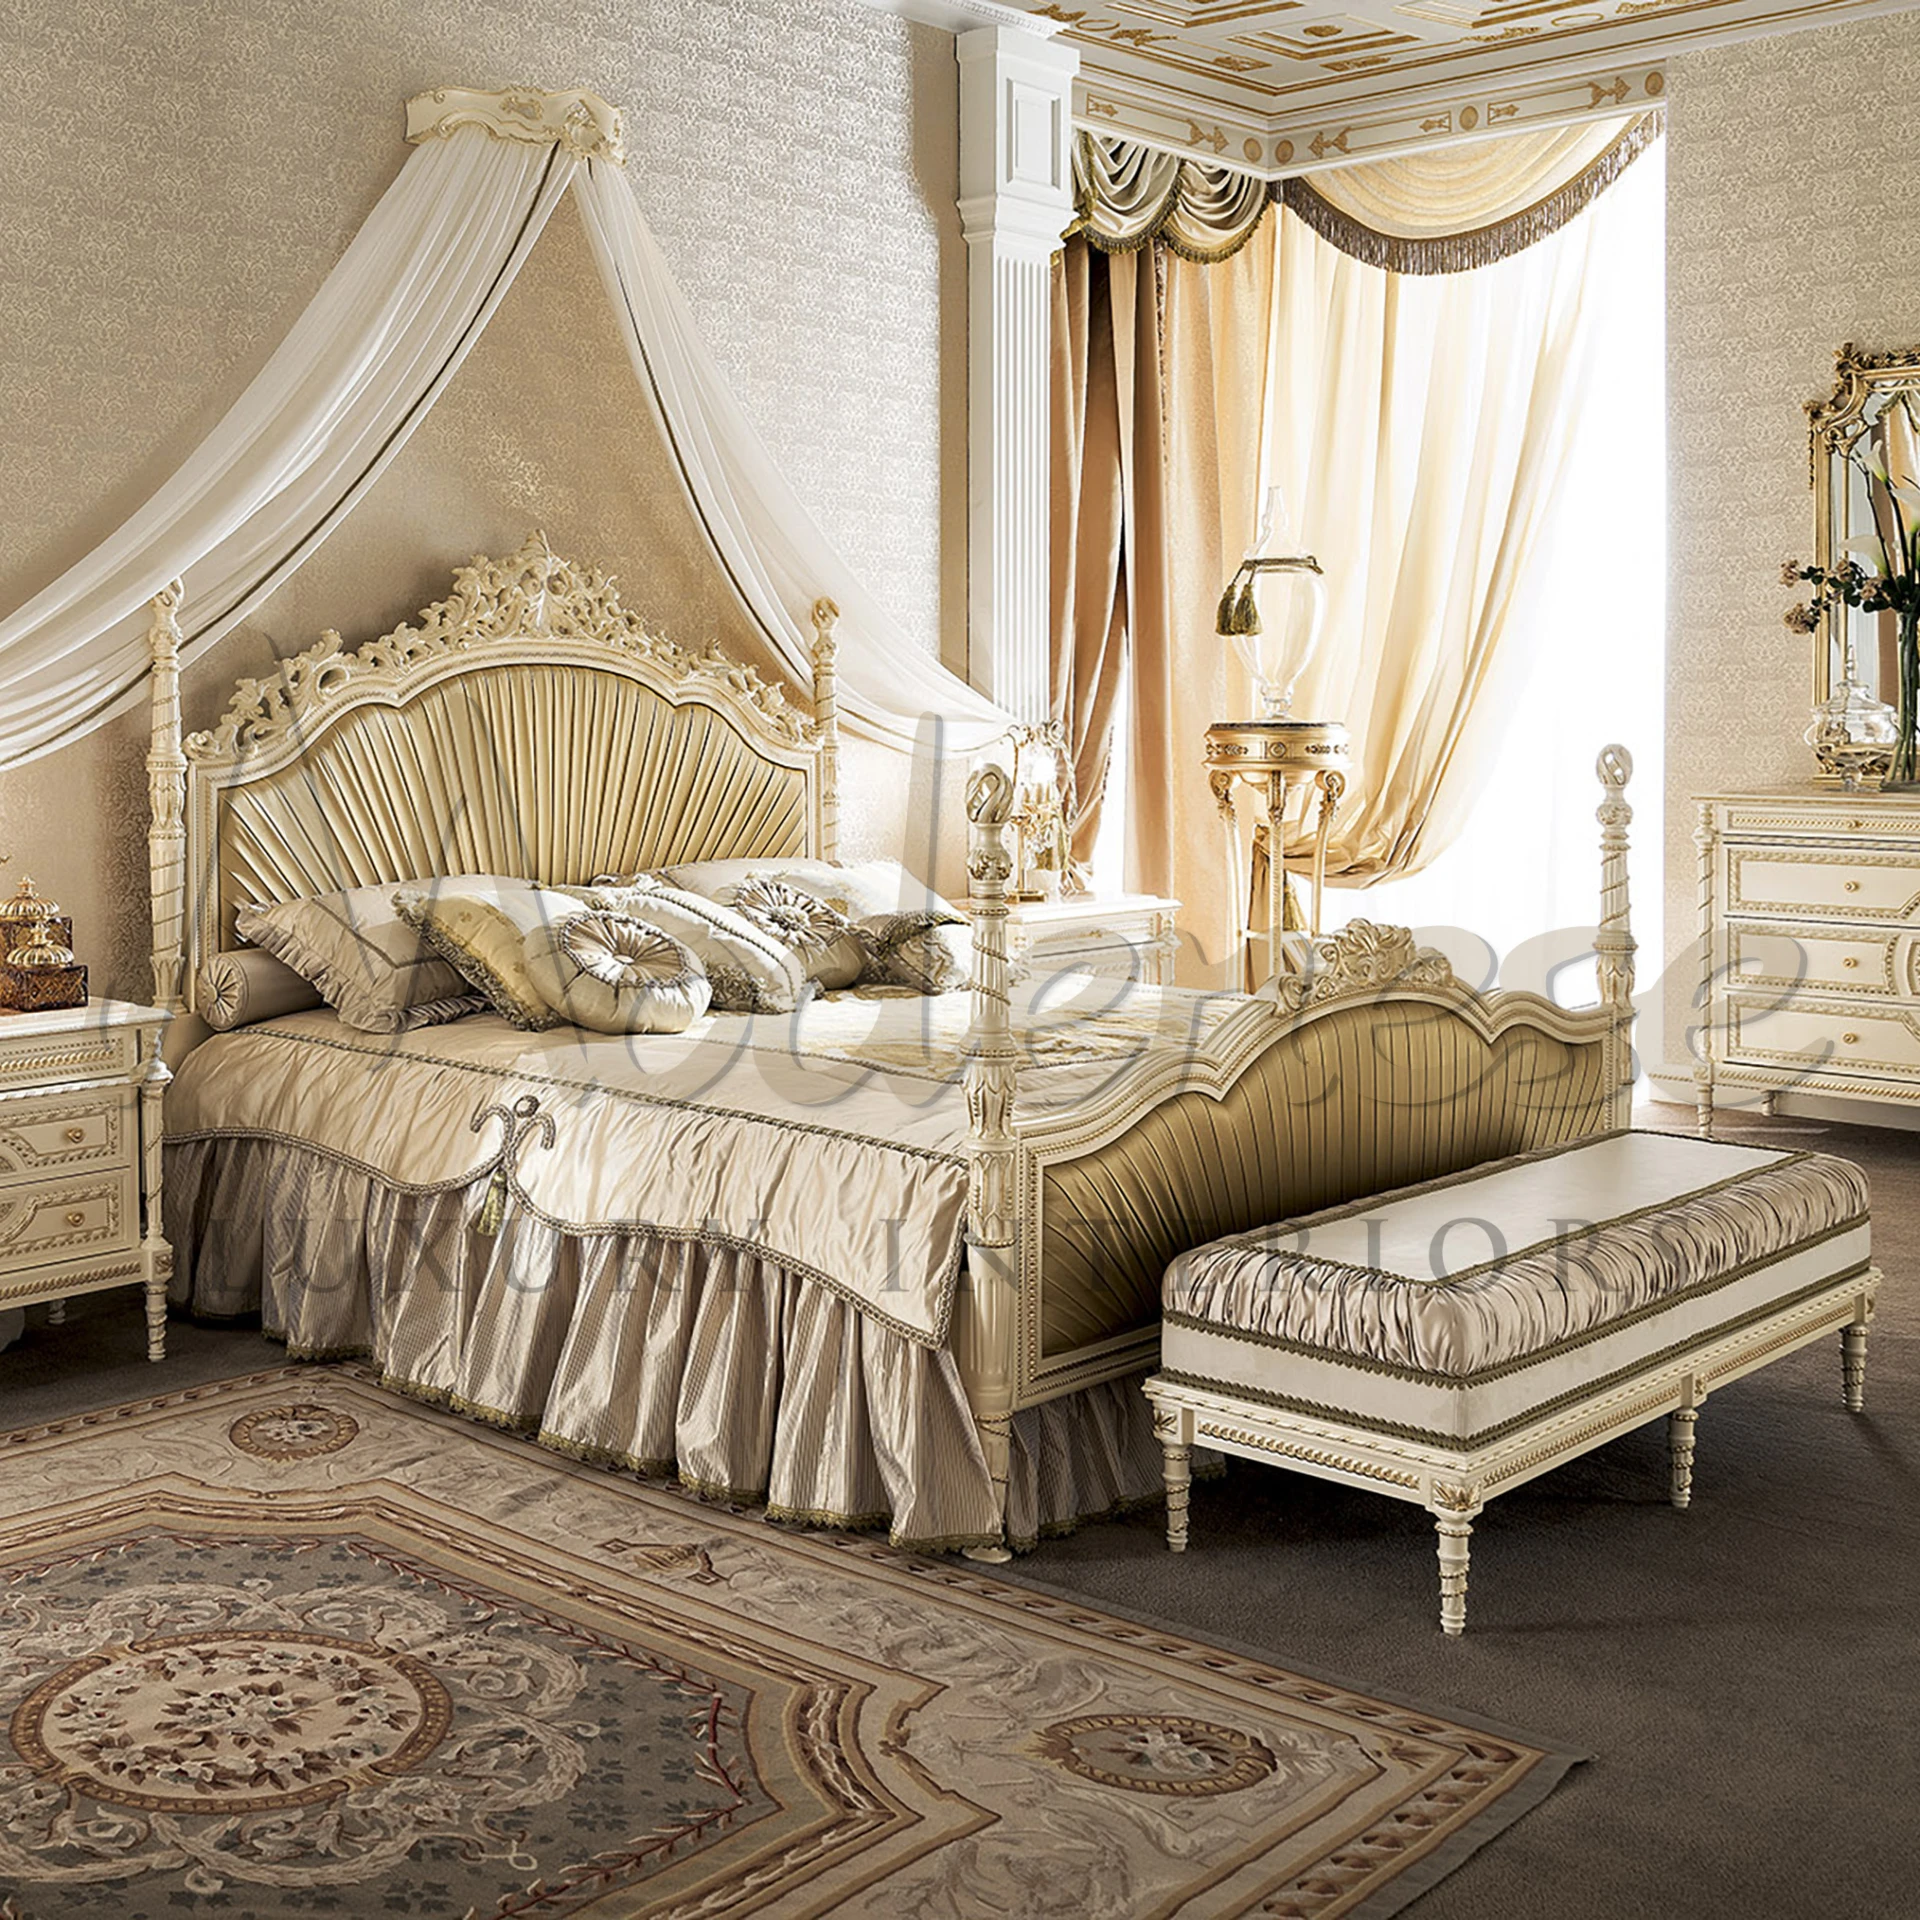 An opulent bedroom featuring a large, ornate canopy bed with a high, decorative headboard and matching footboard, both in a cream and gold color scheme. 